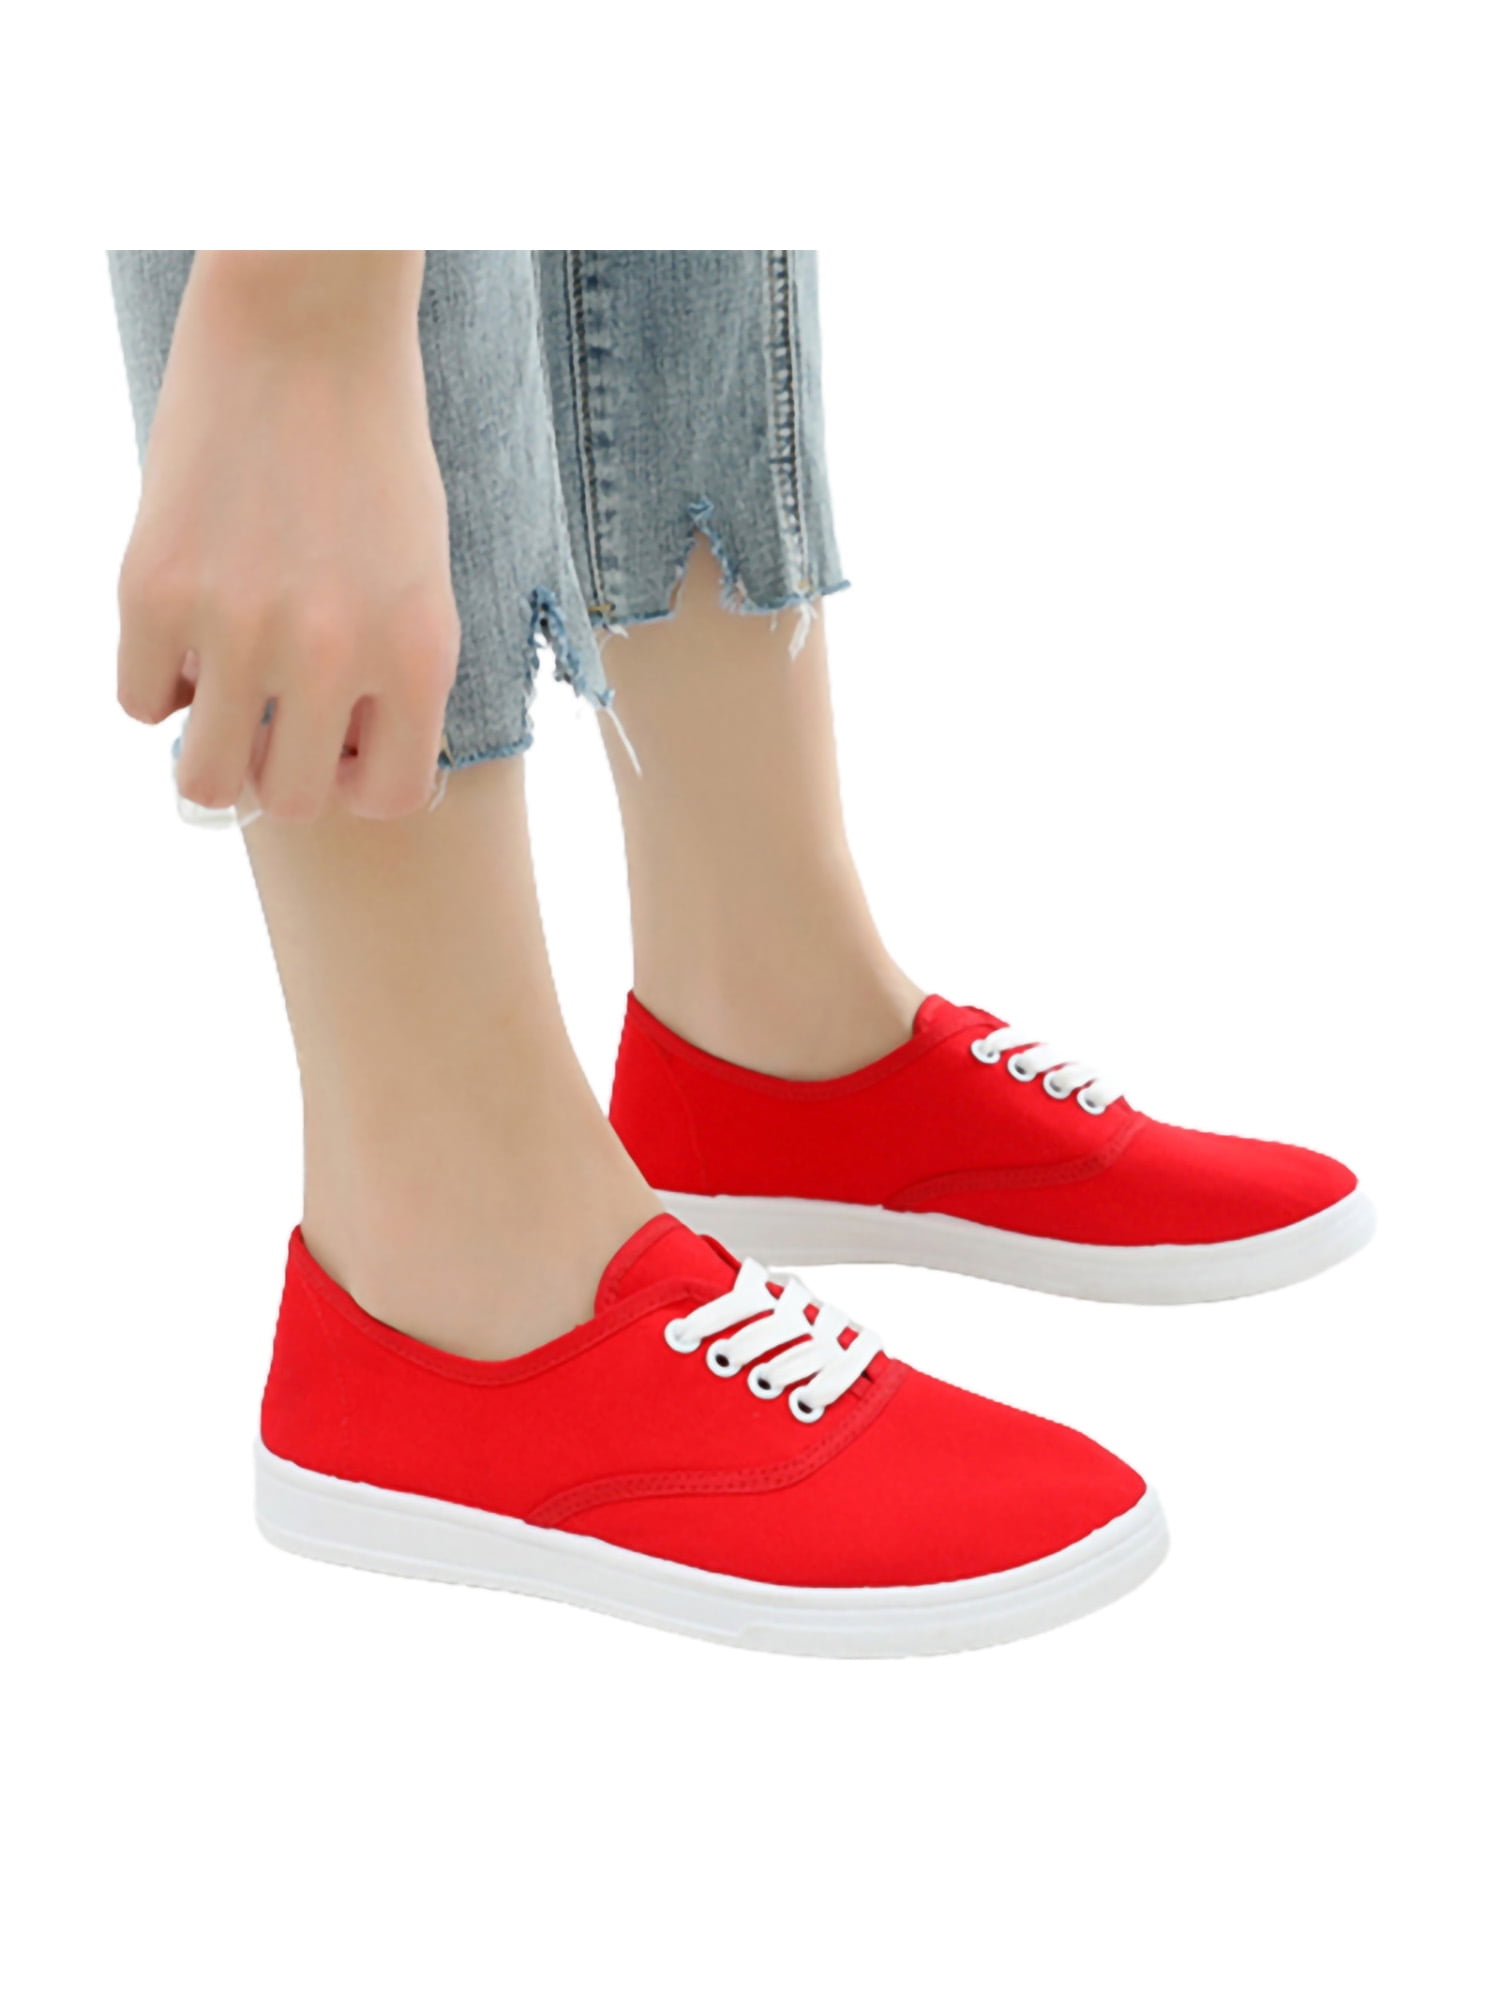 Red Canvas Shoes For Girls & Women Price in Pakistan - View Latest  Collection of Loafers & Moccasins